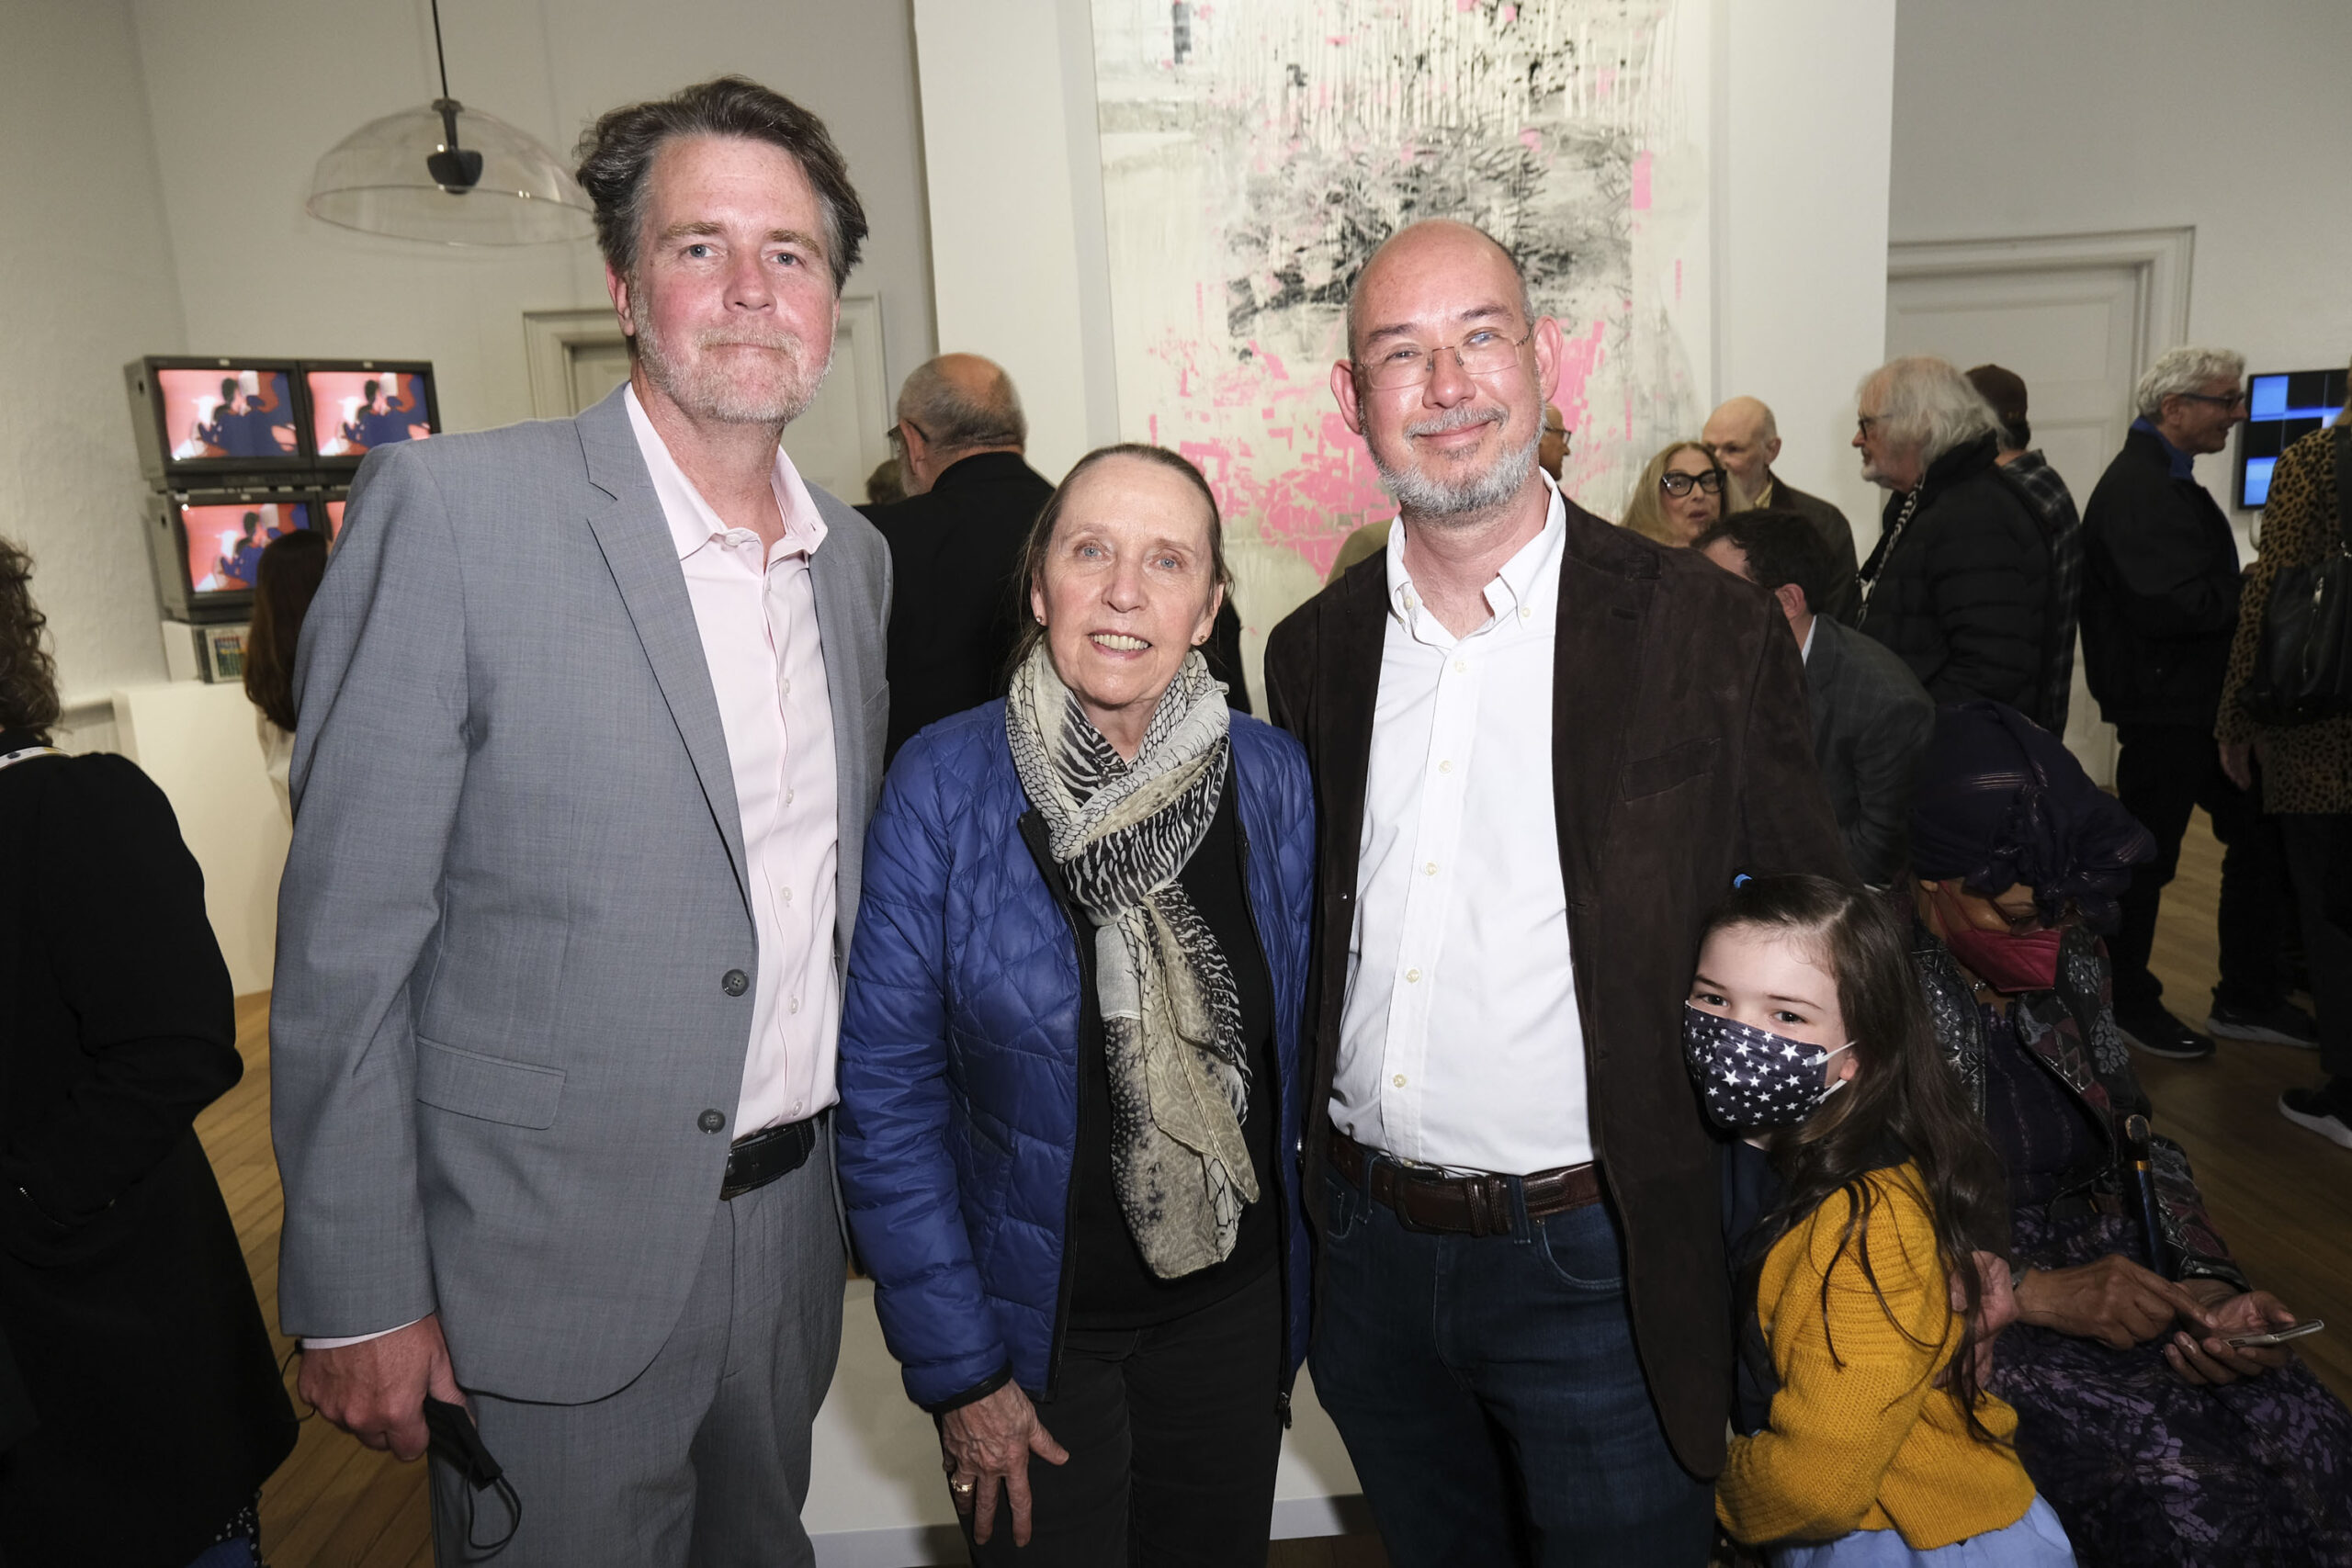 Southampton Arts Center hosted a reception for 